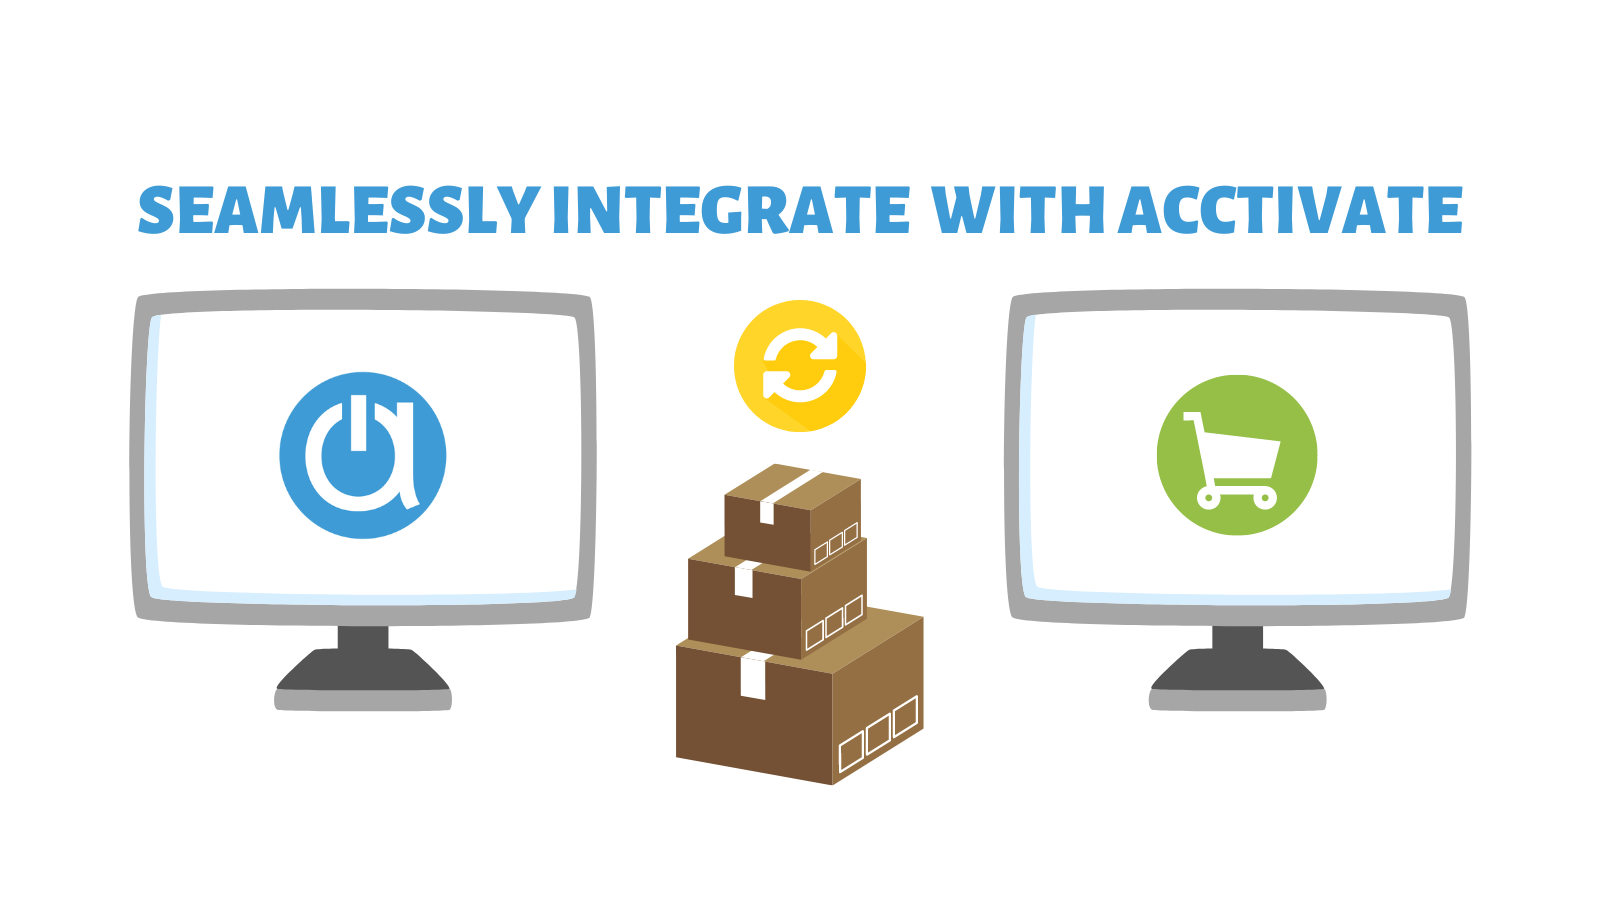 Seamlessly Integrate with Acctivate